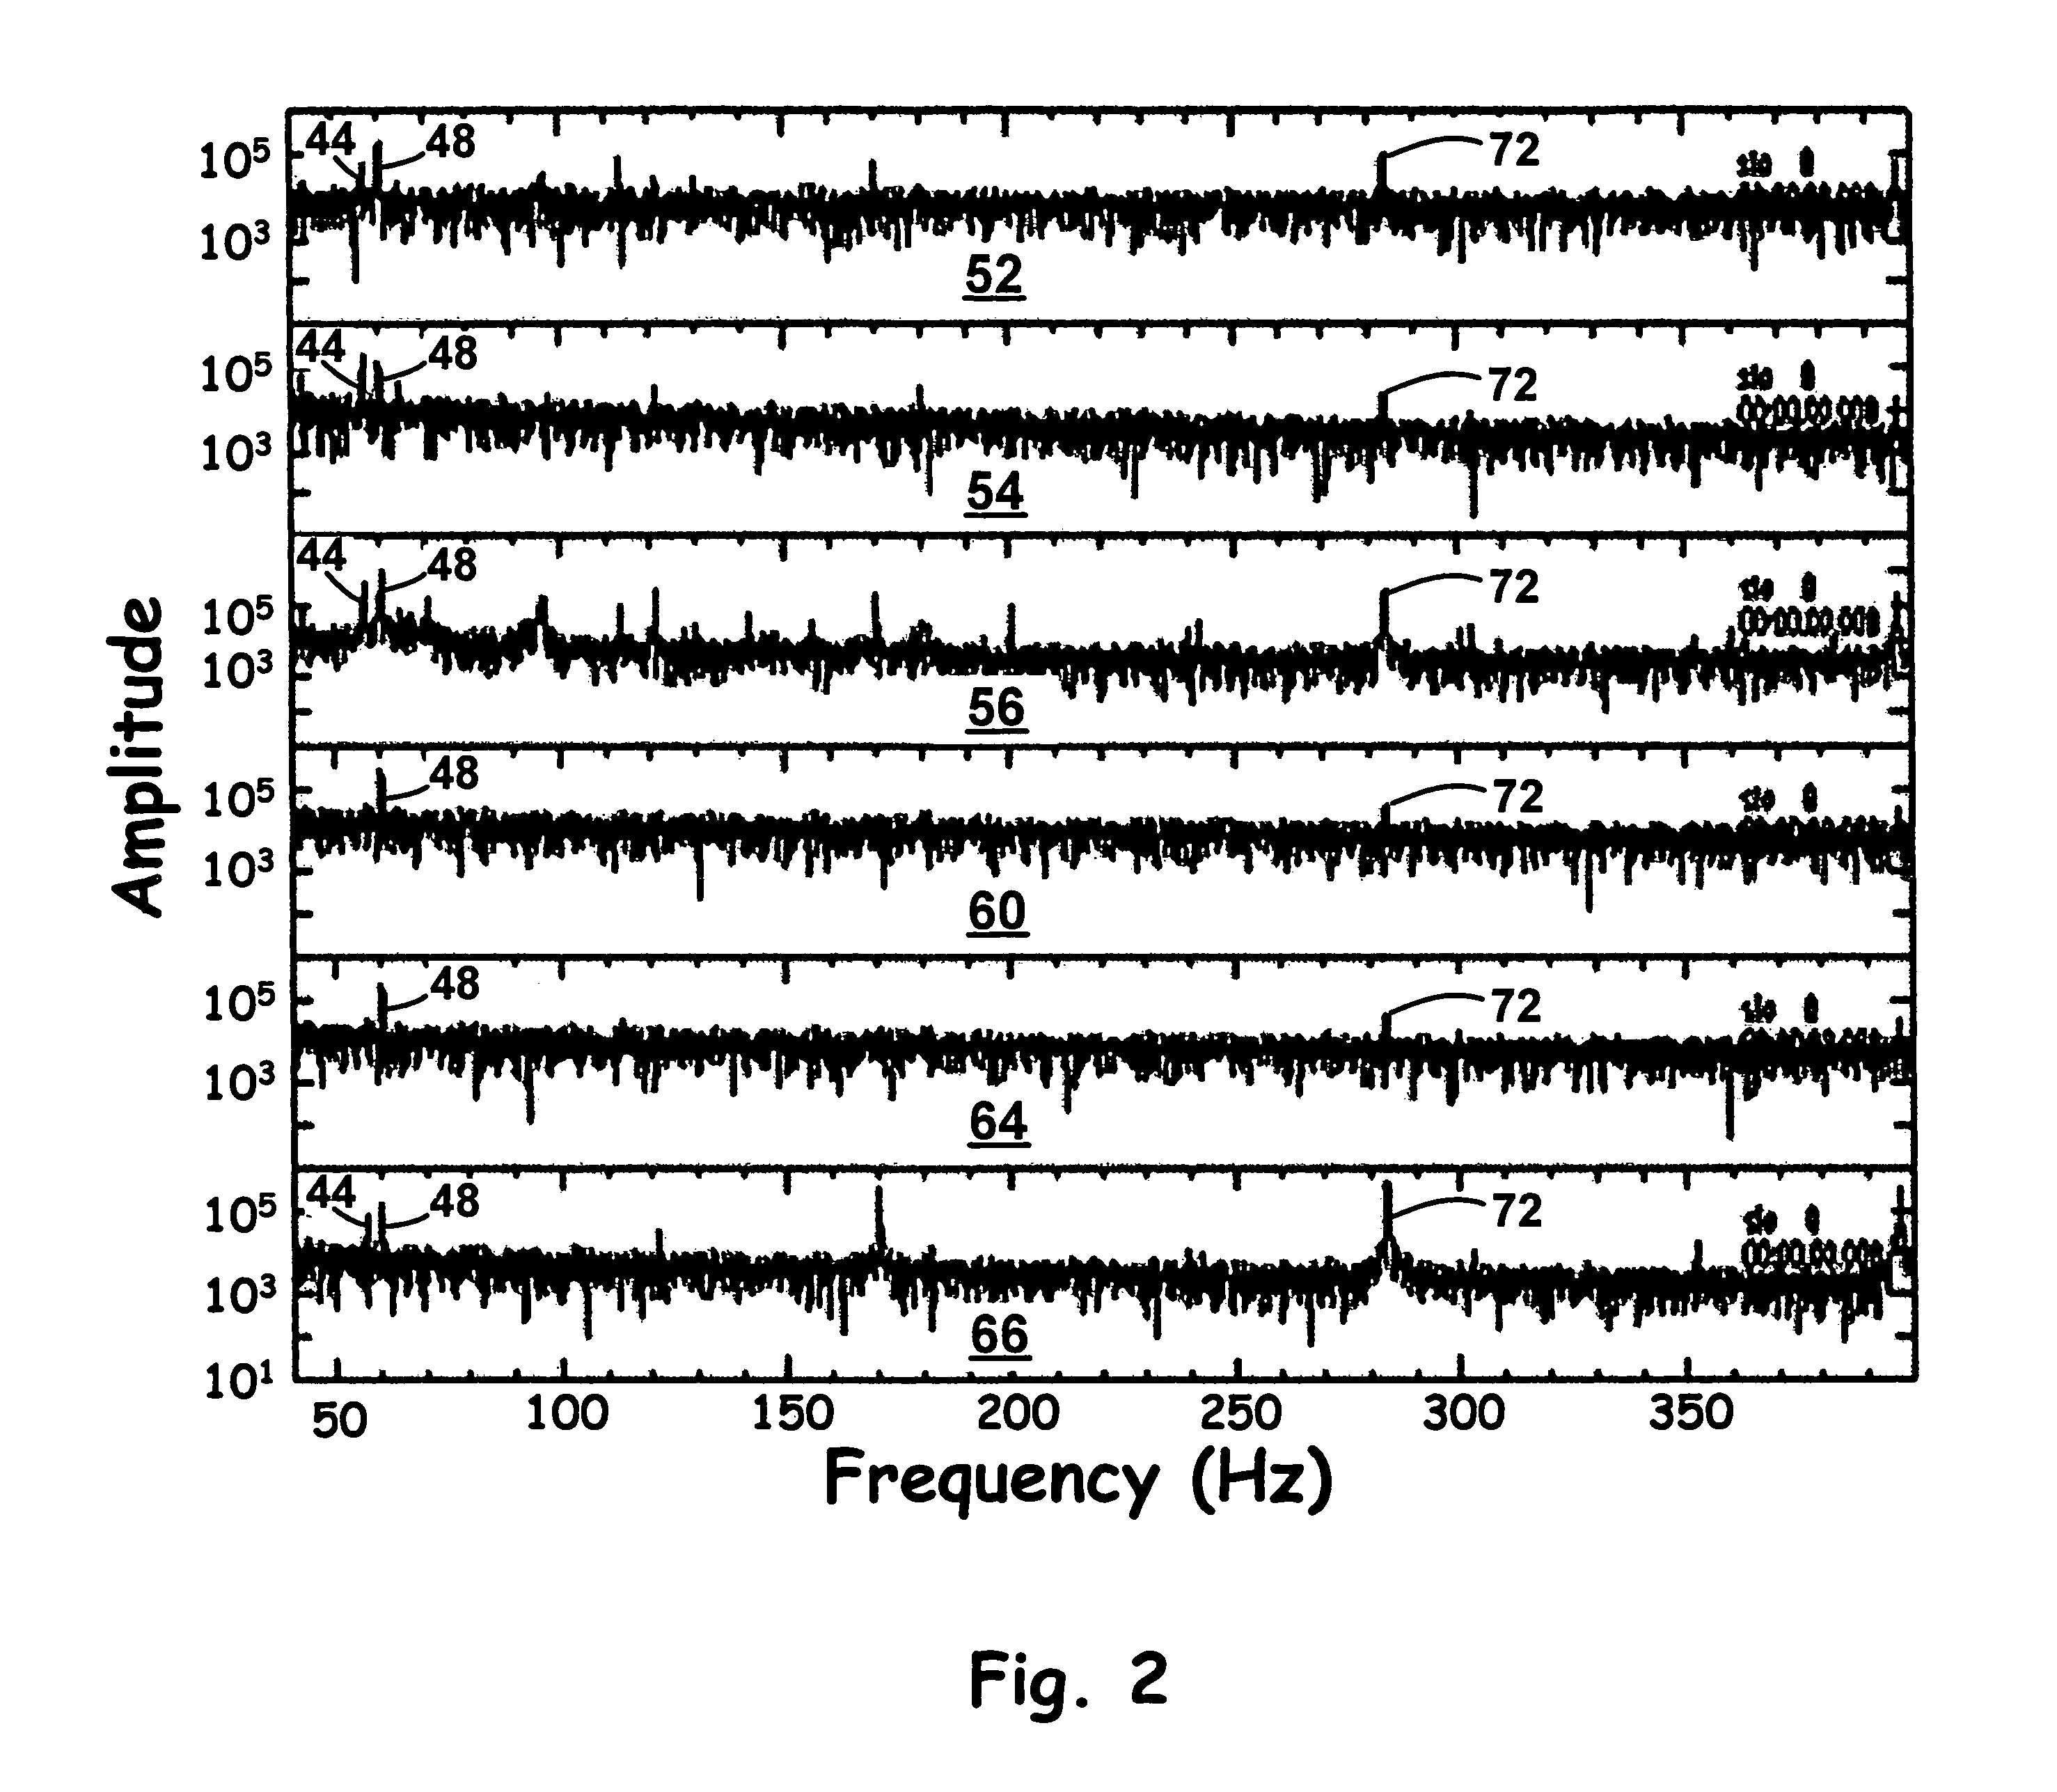 Poynting-vector based method for determining the bearing and location of electromagnetic sources